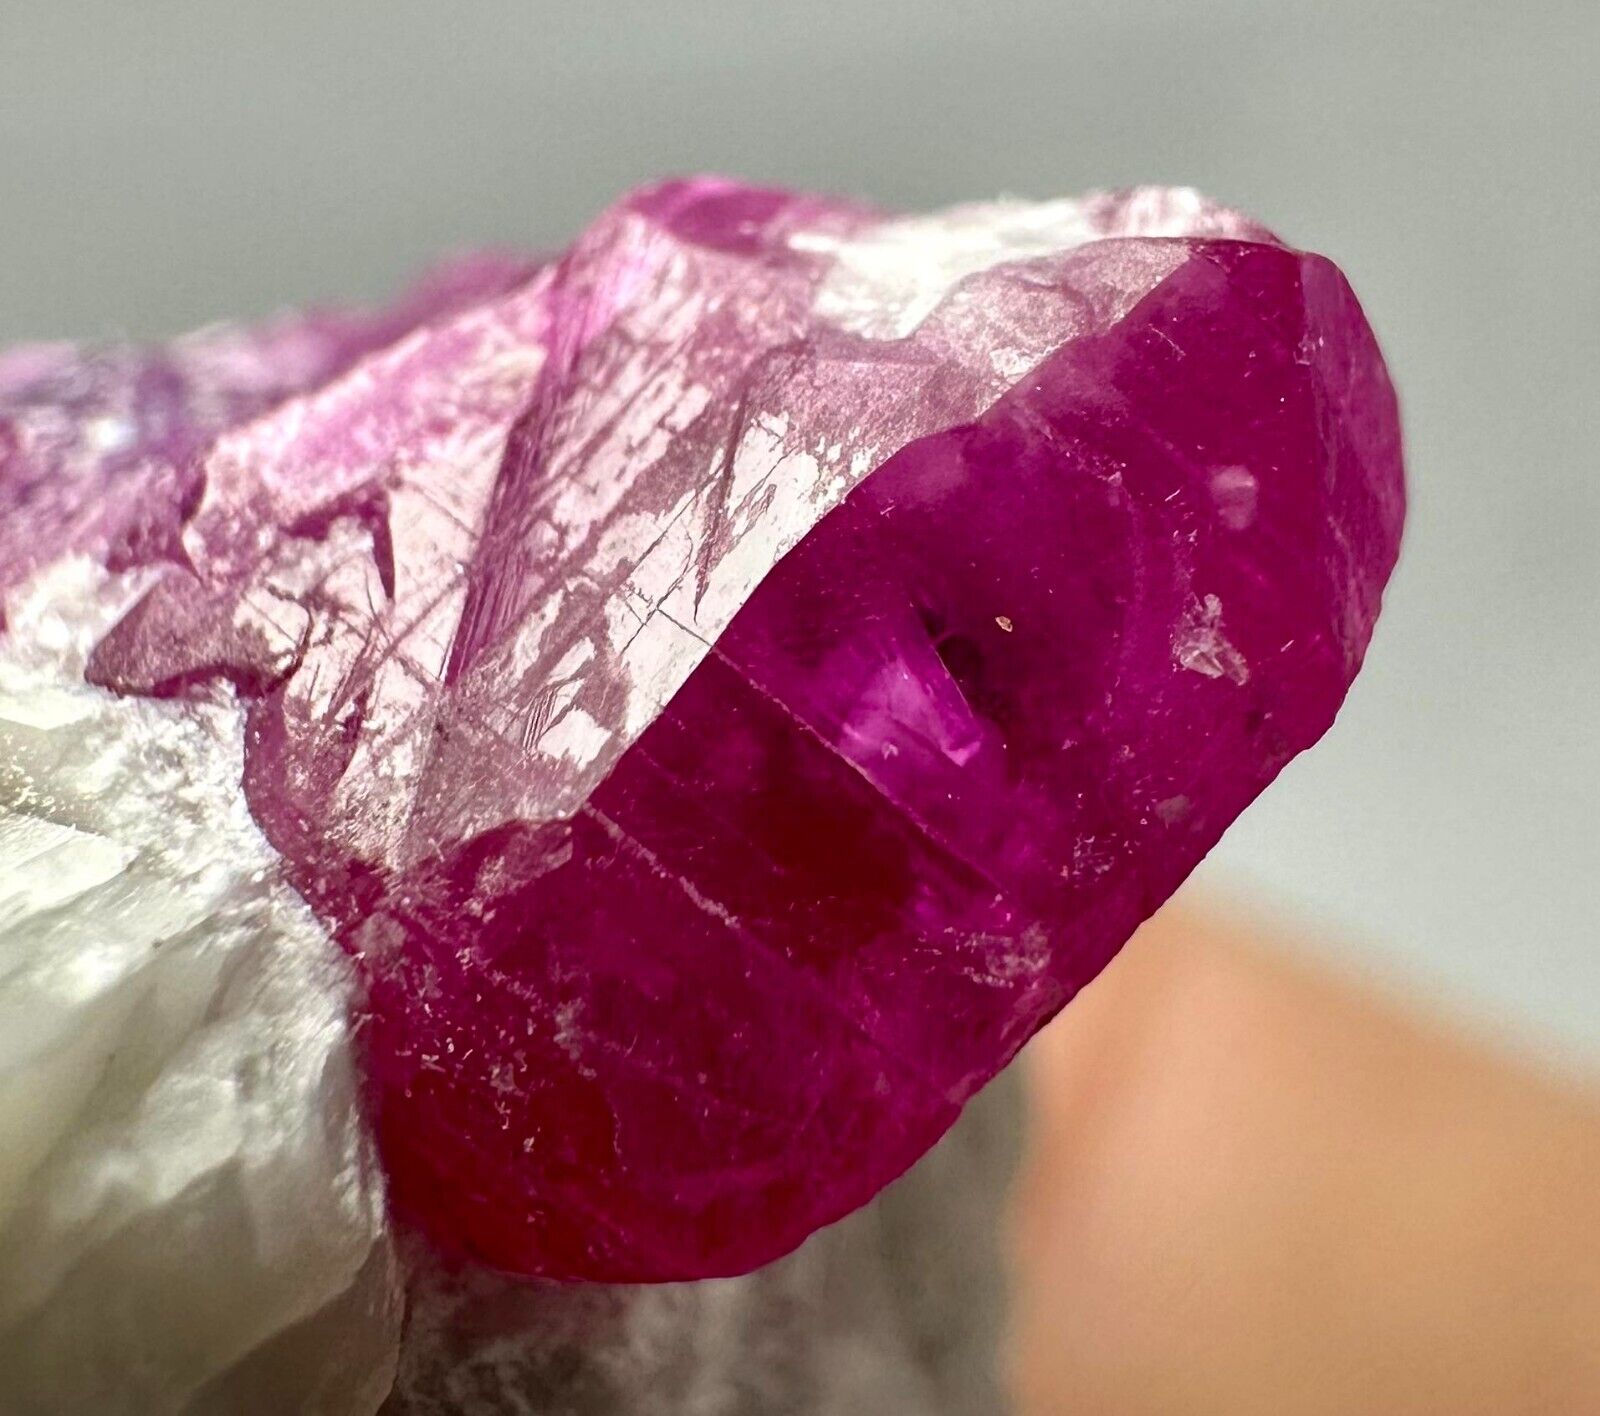 375 Carat Well Terminated Top Quality Ruby Huge Crystal On Matrix From @Afg